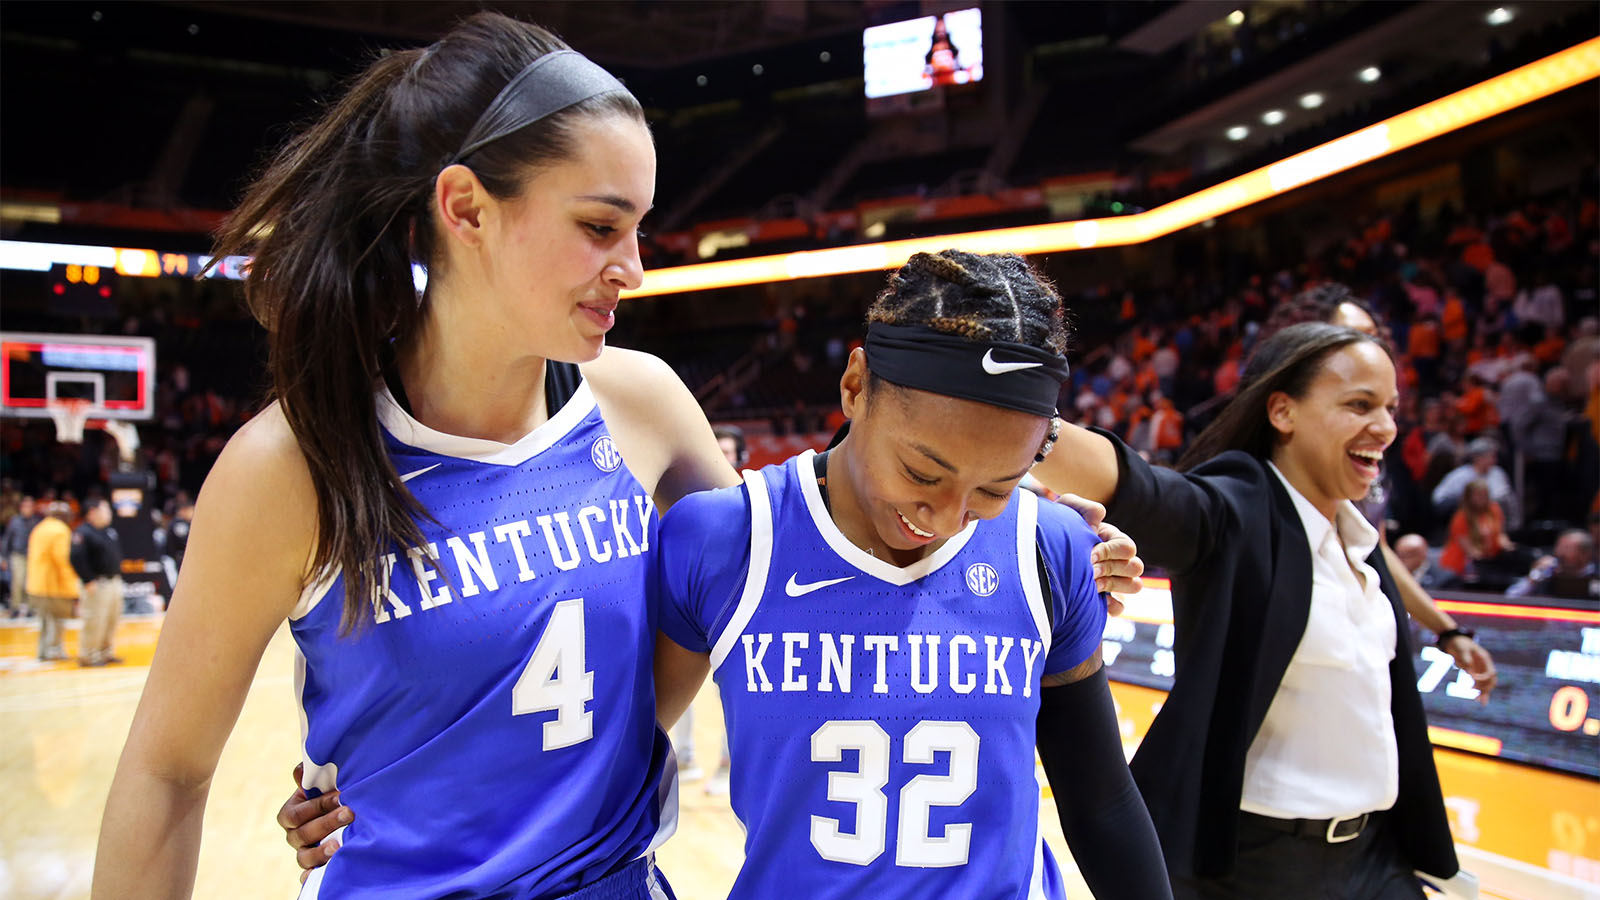 Morris Scores 27 Points as No. 16 UK Downs No. 13 Tennessee